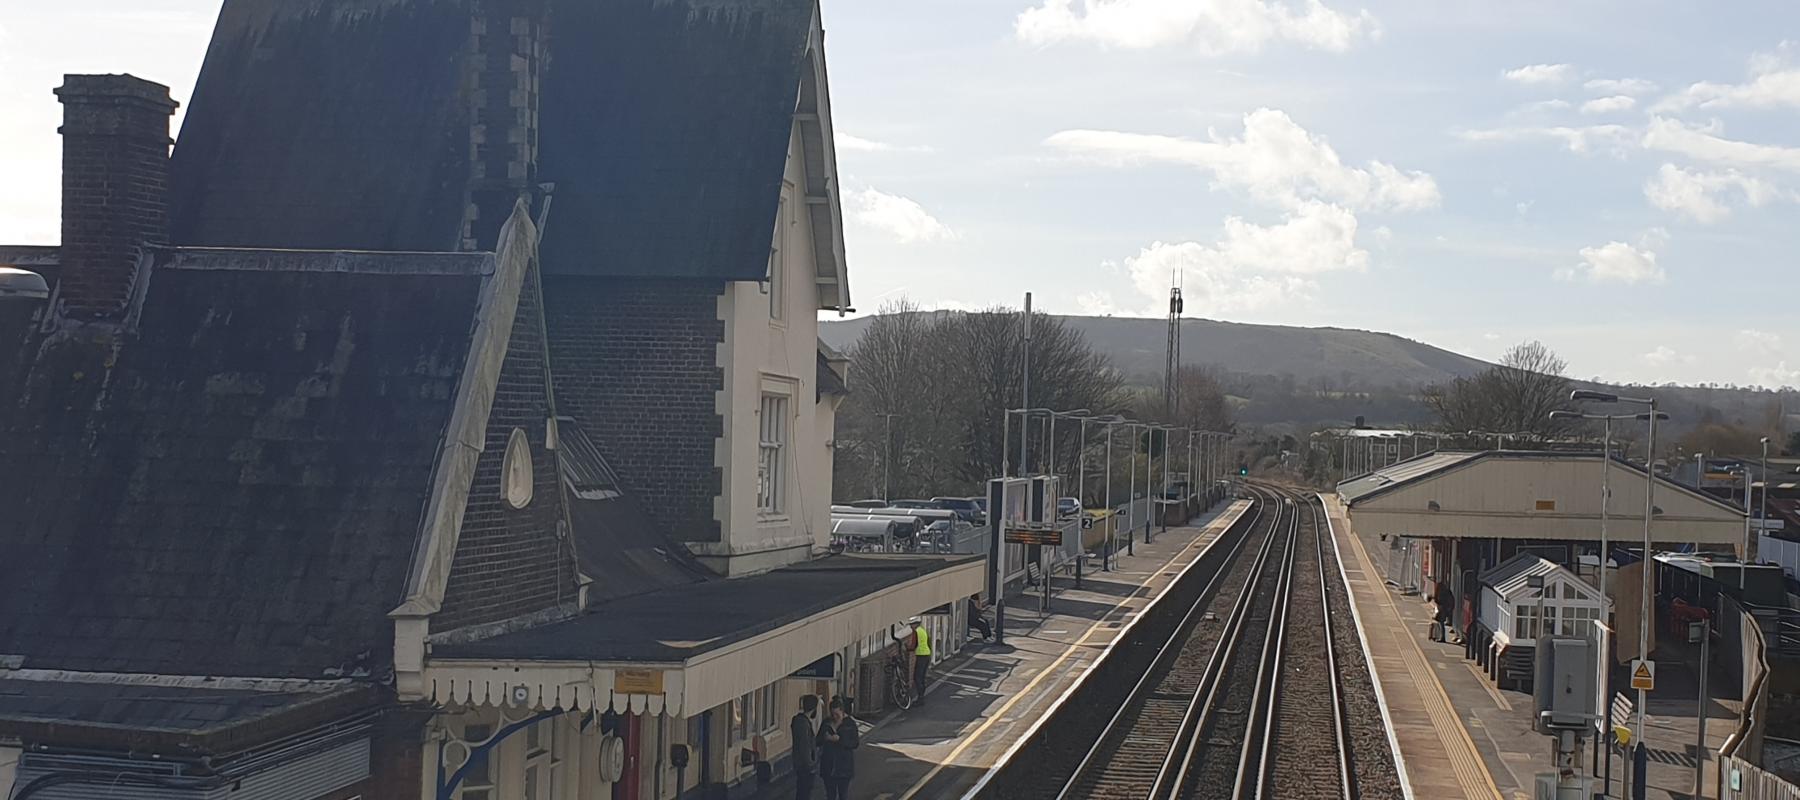 Looking at Petersfield Railway Station from the bridge